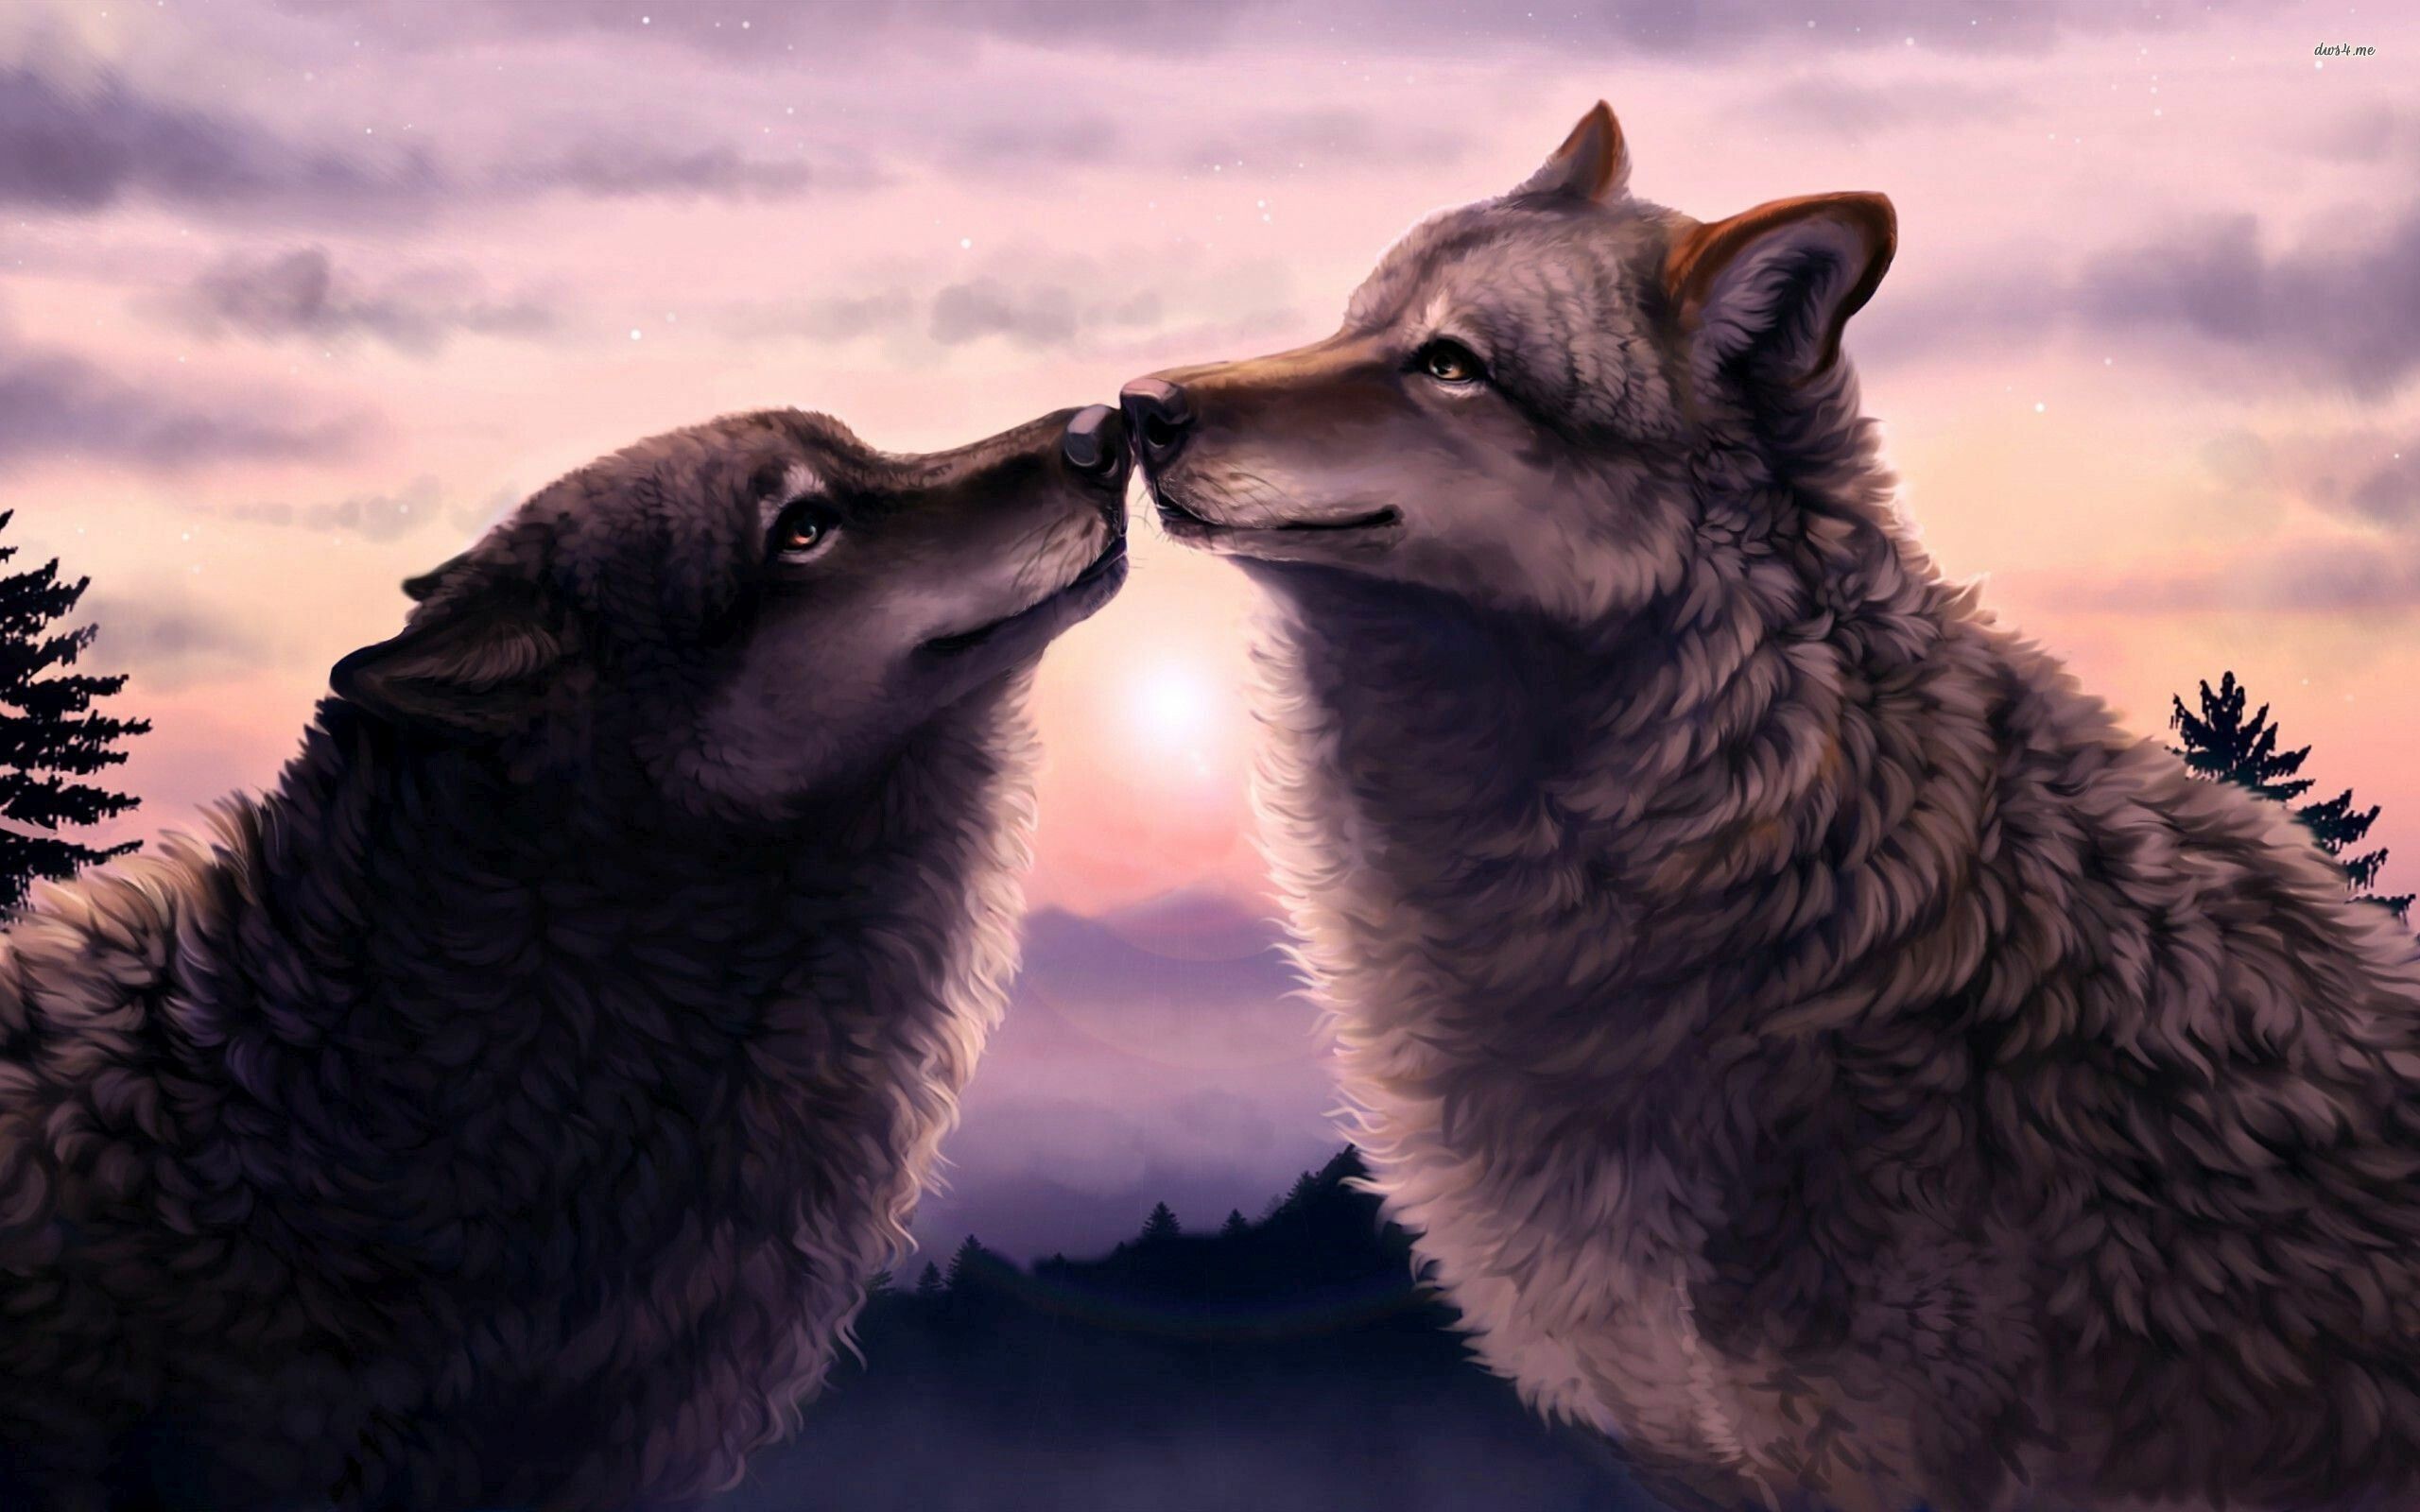 Love Wolf Wallpaper: HD, 4K, 5K for PC and Mobile. Download free image for iPhone, Android